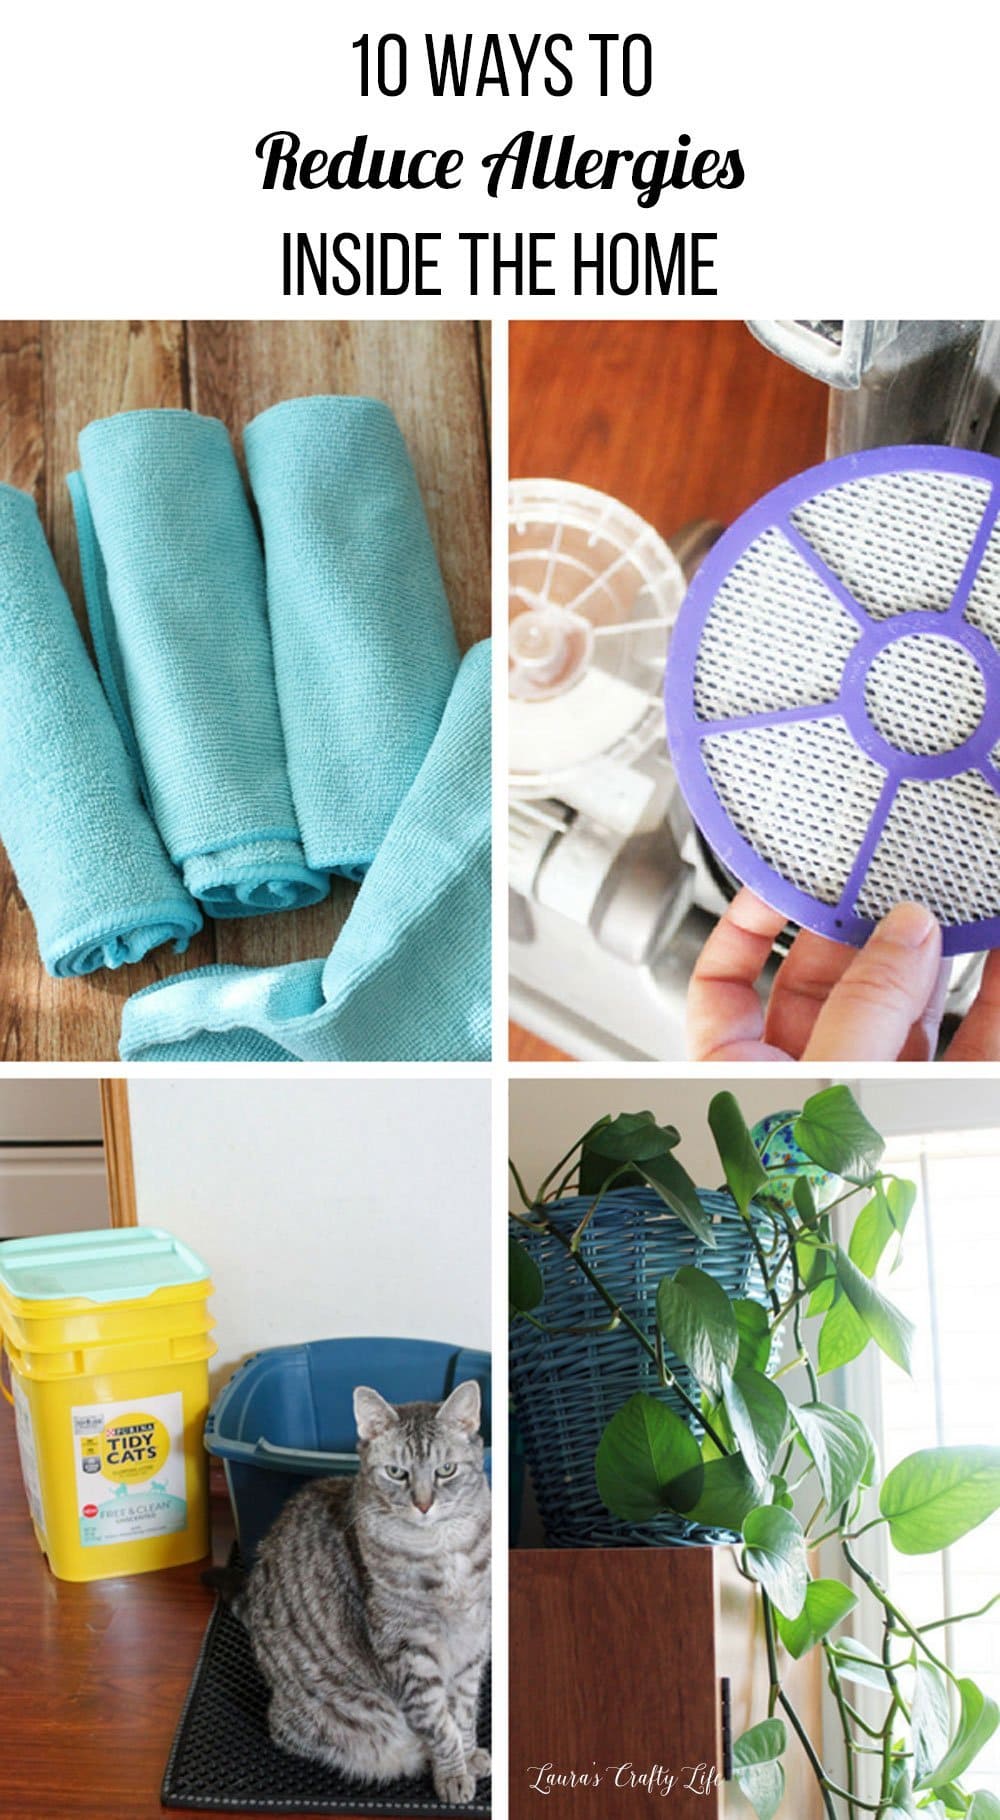 10 ways to reduce allergies inside the home #shop